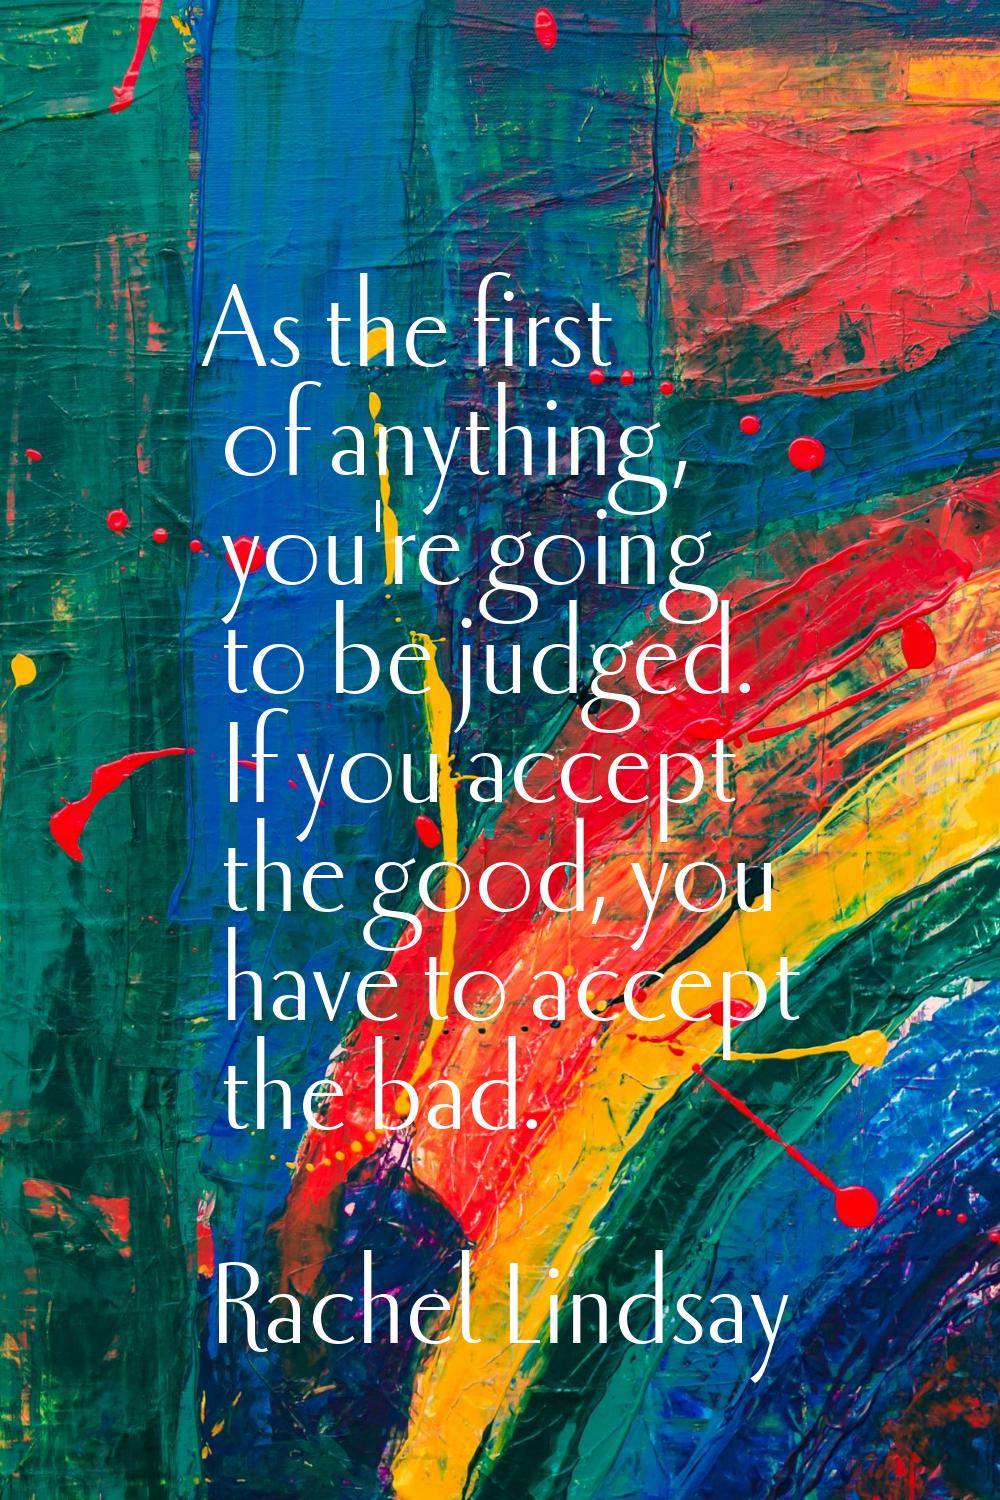 As the first of anything, you're going to be judged. If you accept the good, you have to accept the